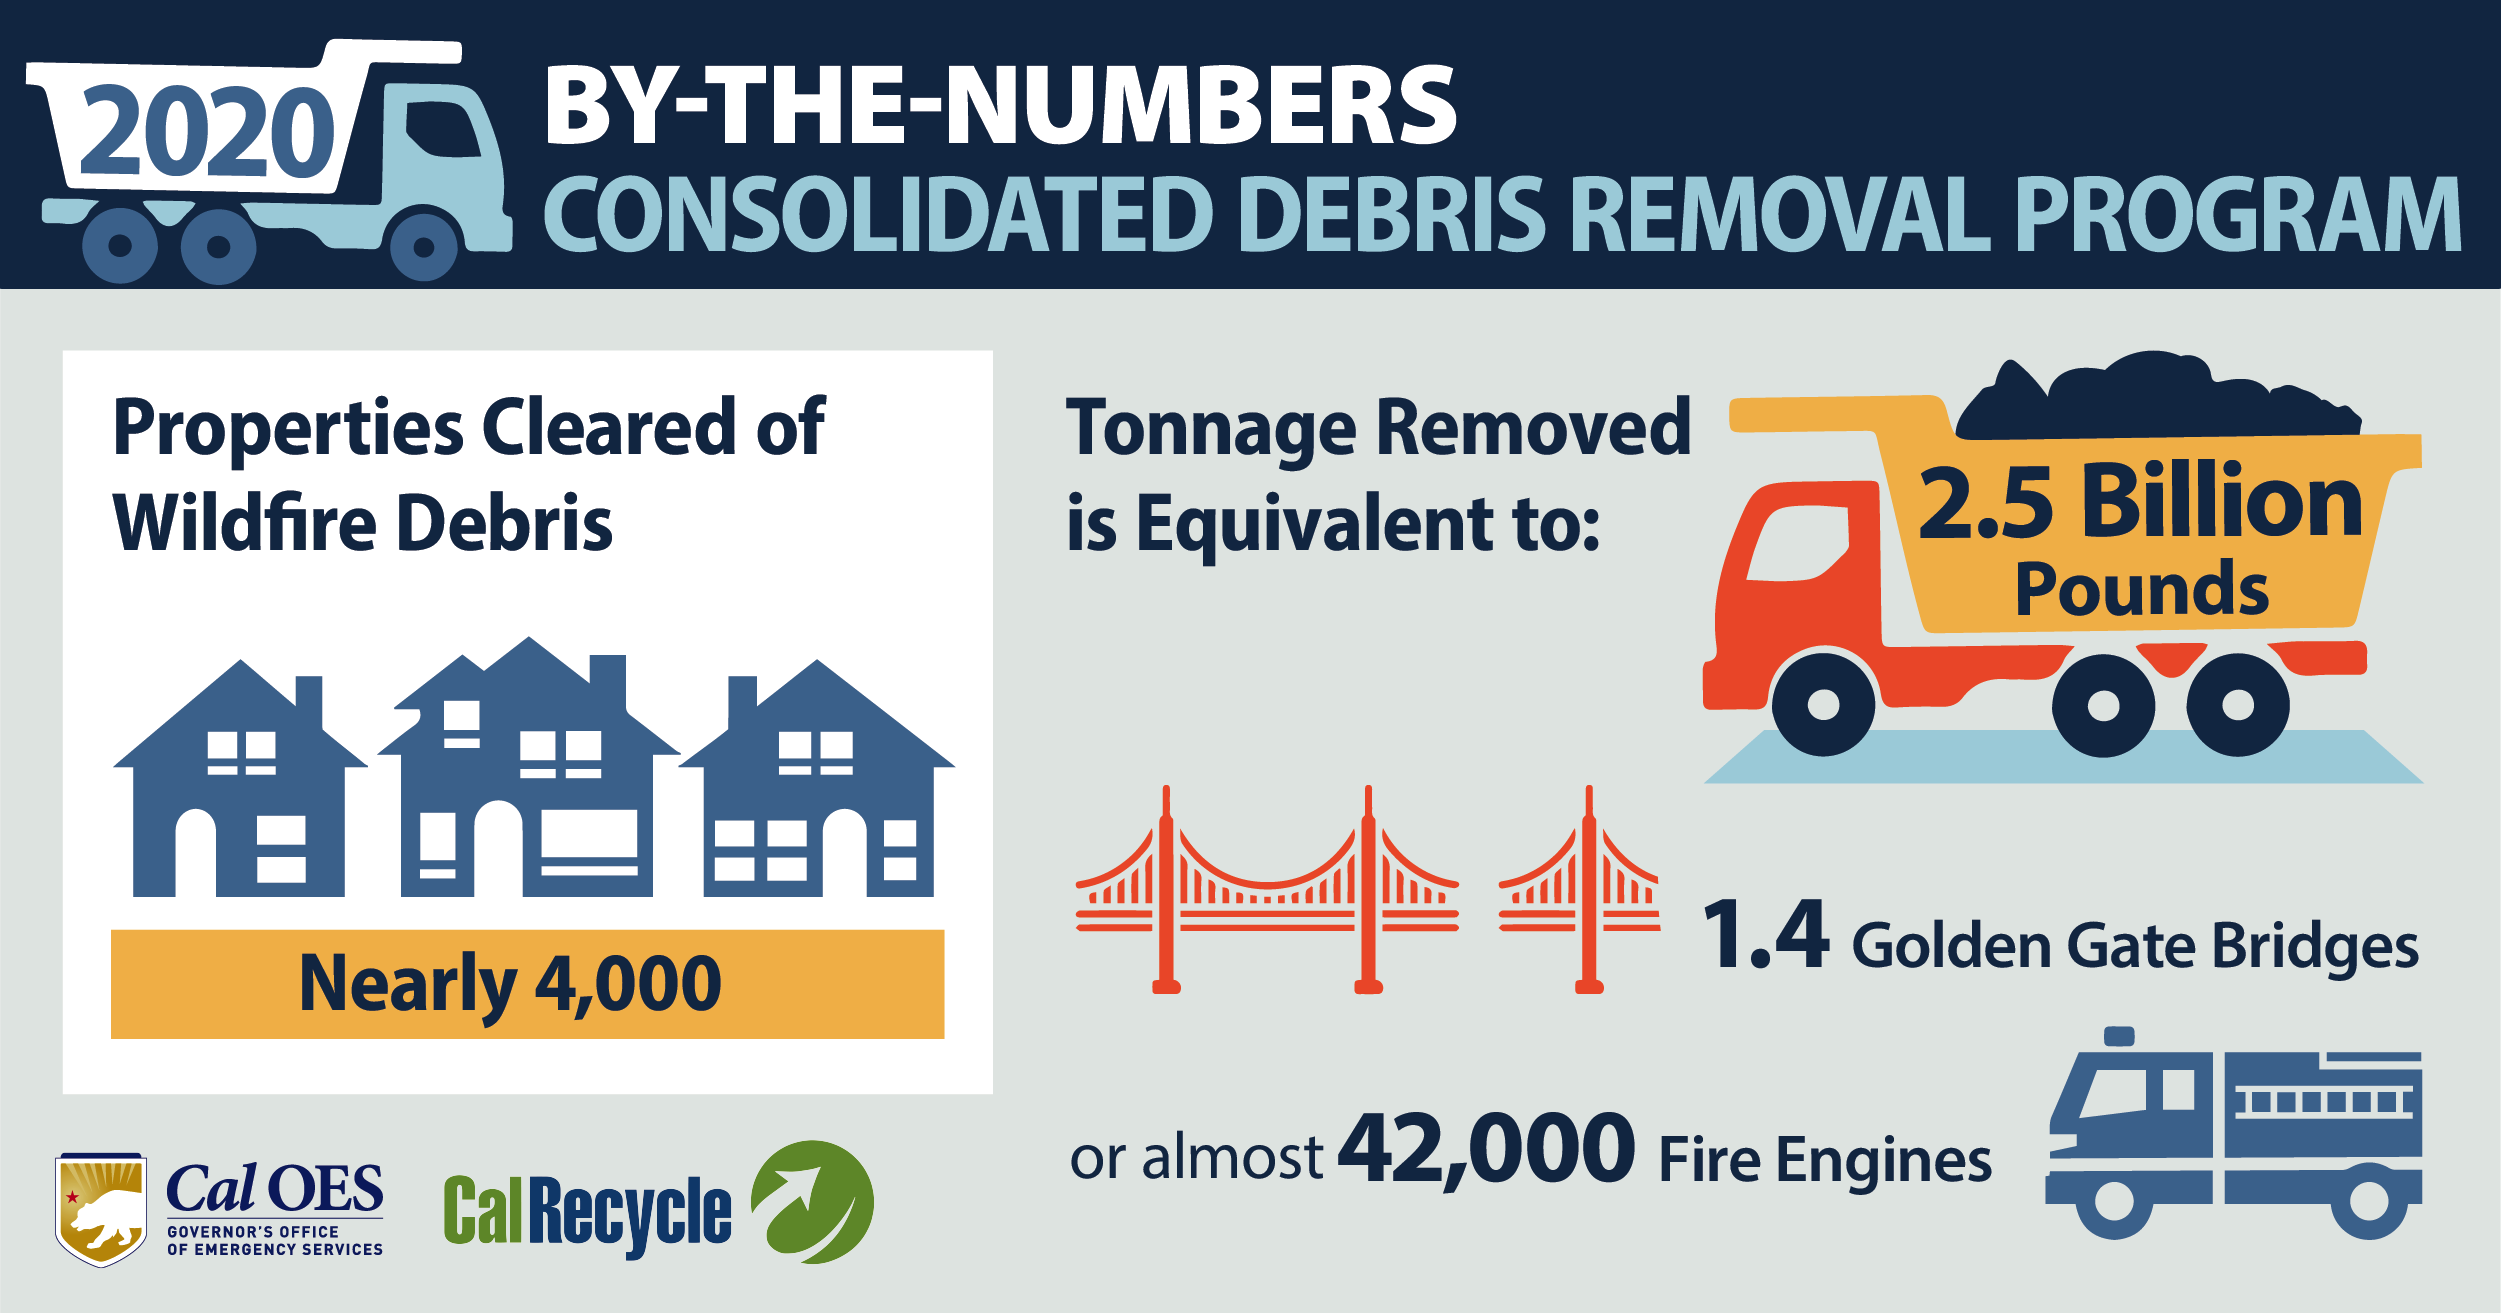 2020 By the Numbers Consolidated Debris Removal Program. Properties Cleared of Wildfire Debris=nearly 4,000. Tonnage Removed is Equivalent to=2.5 billion pounds or 1.4 Golden Gate Bridges or almost 42,000 fire engines. Cal OES and CalRecycle logos.